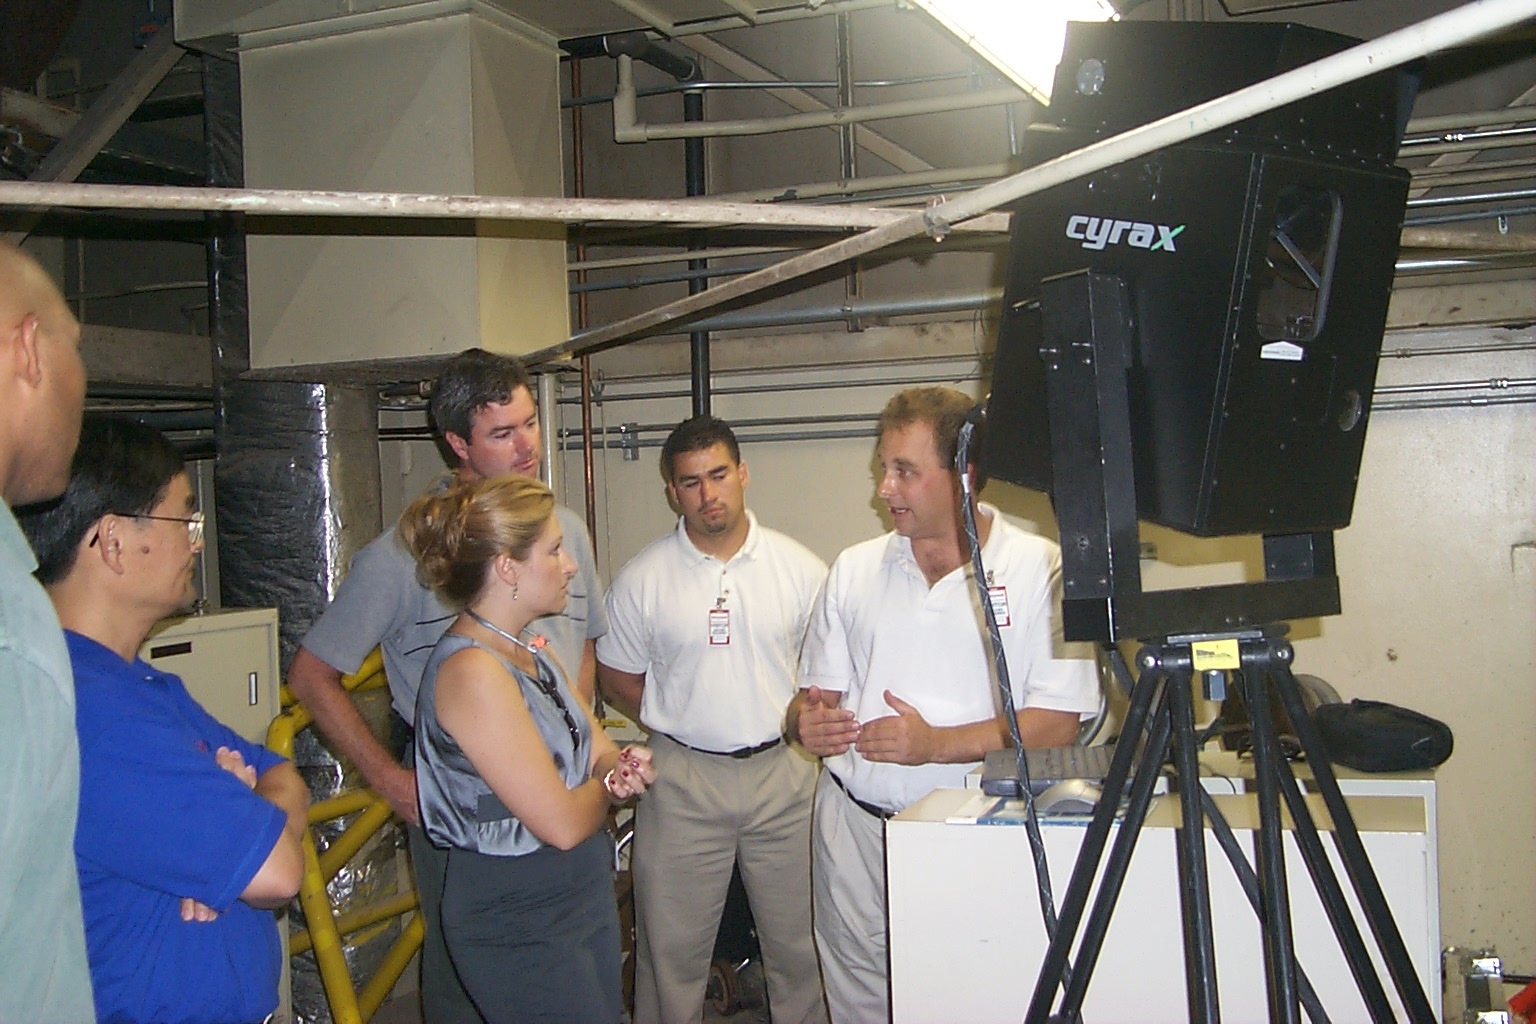 Demos of Cyrax were critical for generating sales. Far right is application engineer Guy Cutting. Cyra salesman, Tony Grissim, is middle-rear. Like the author, Grissim left Trimble to join start-up Cyra. 